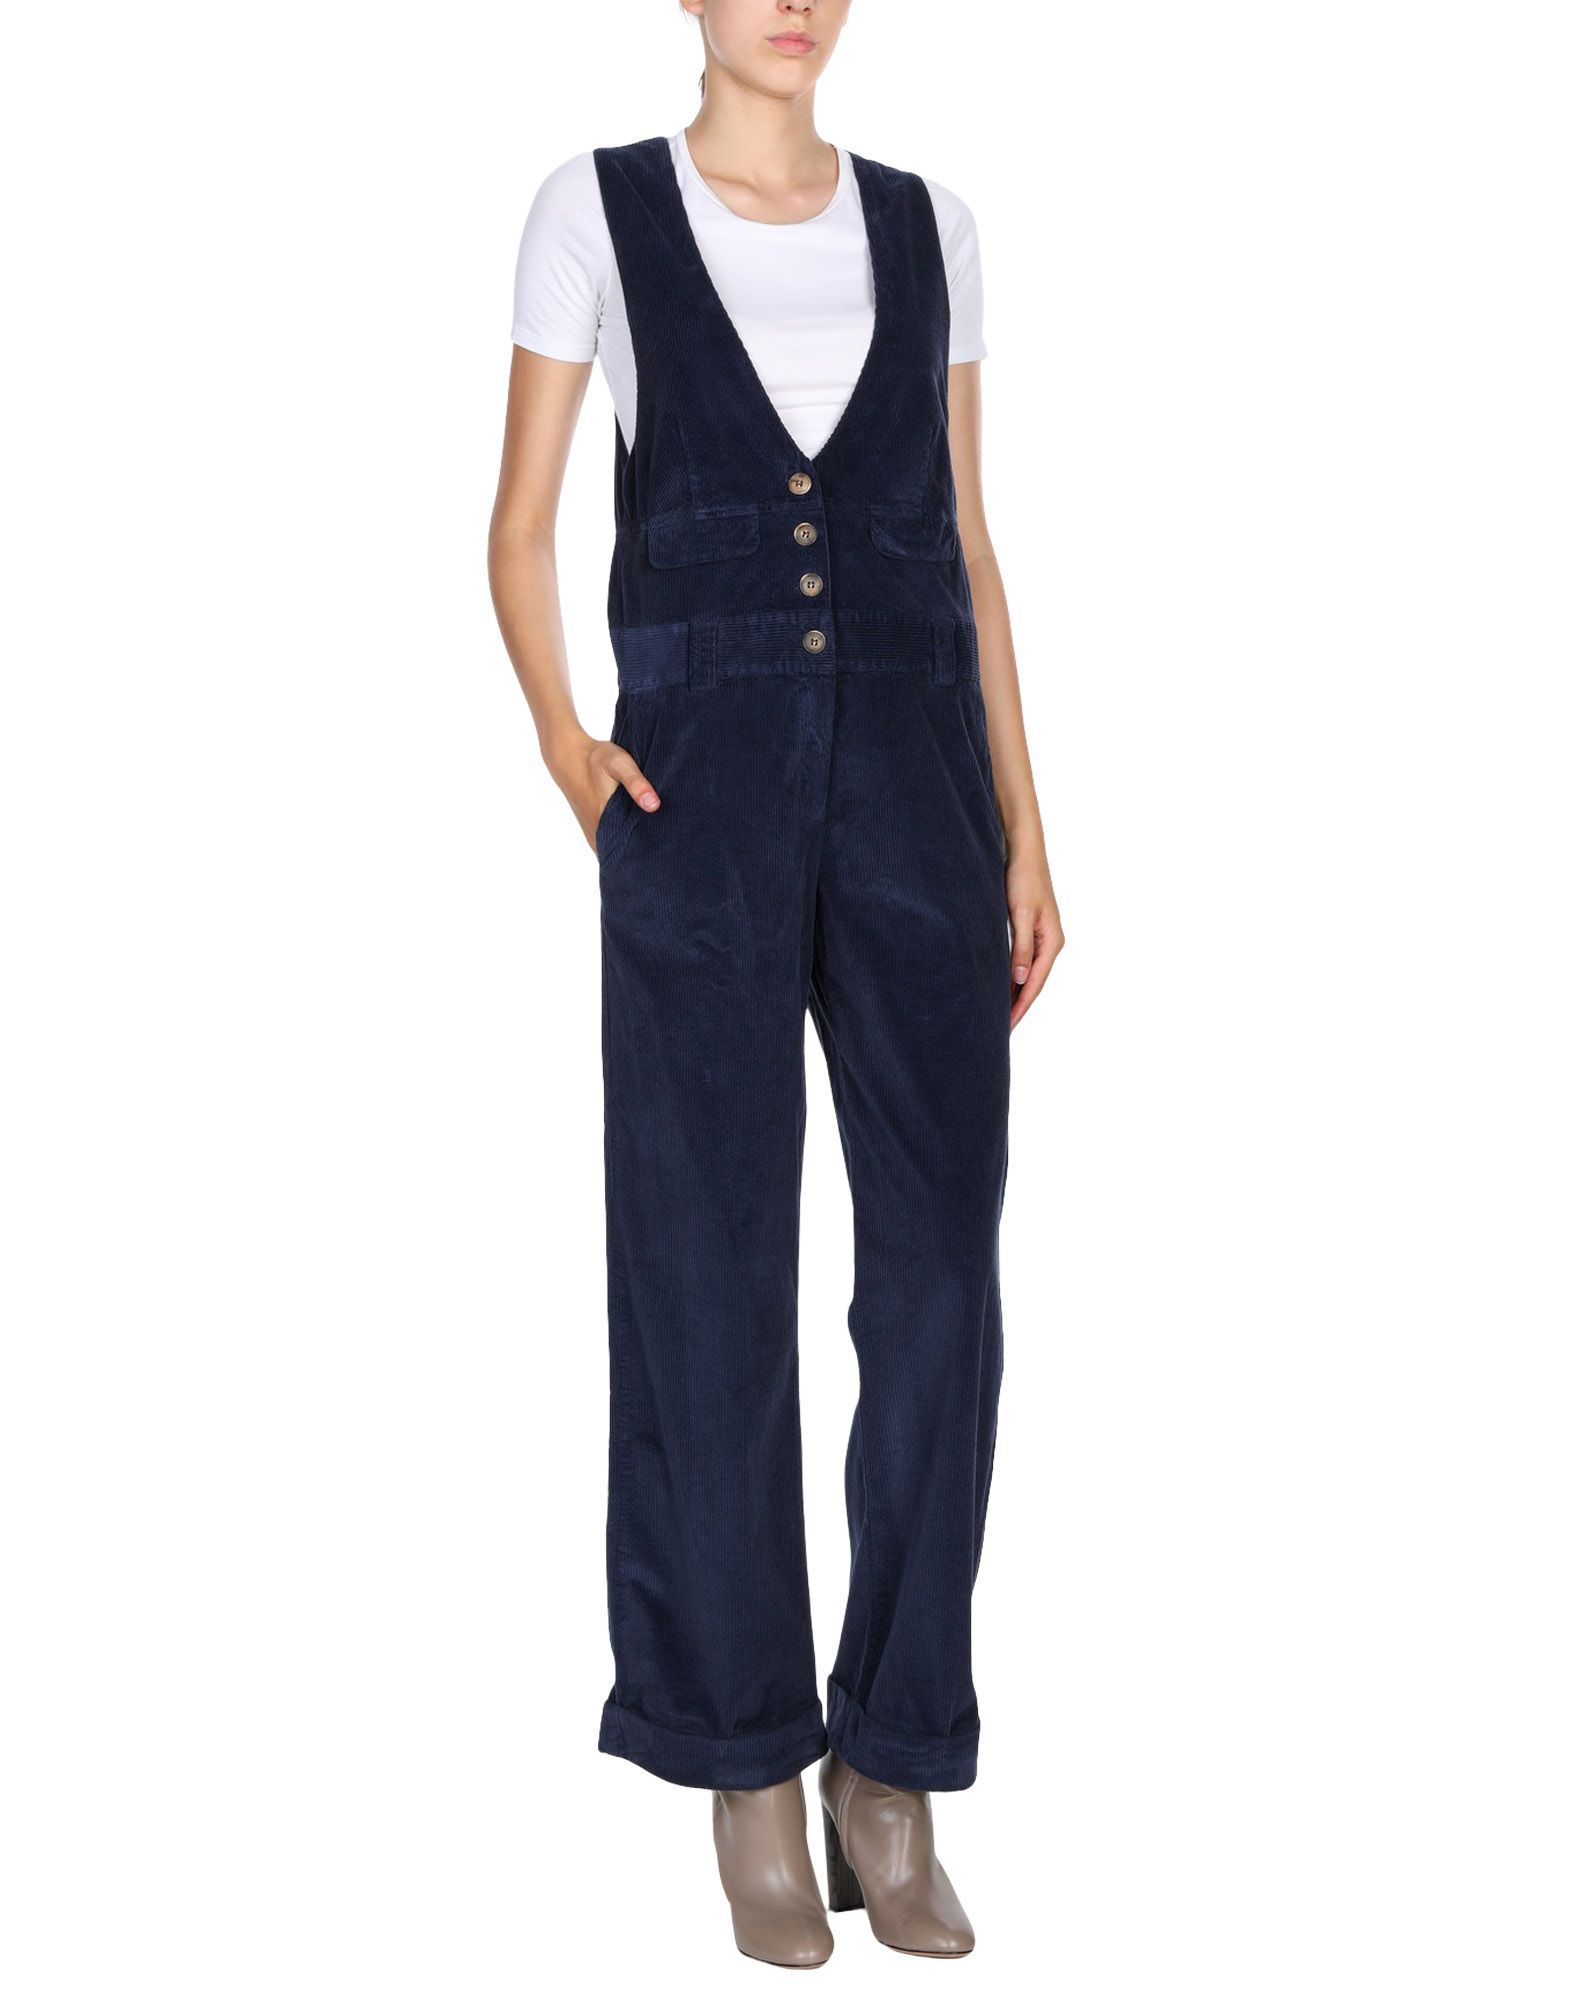 SEMICOUTURE Overalls | YOOX (US)